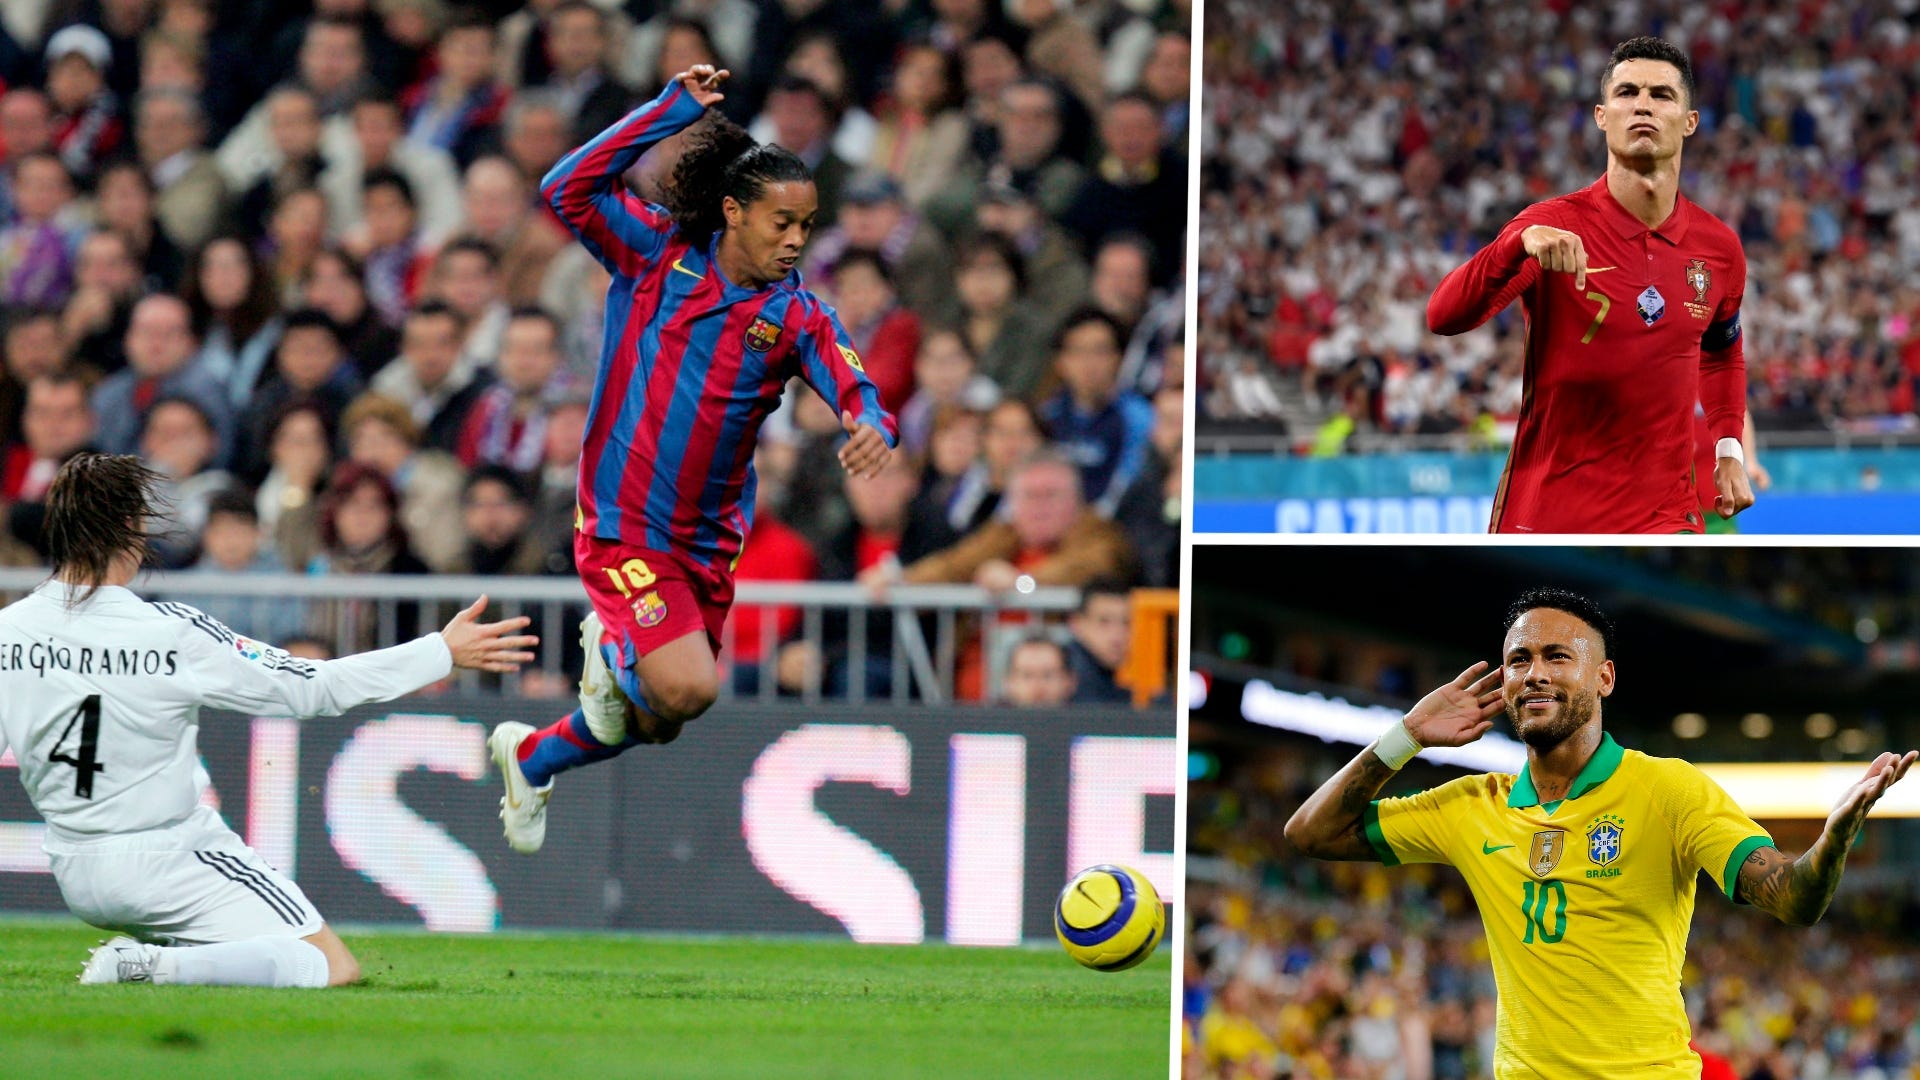 THE MOST ICONIC SKILL MOVES IN FOOTBALL HISTORY